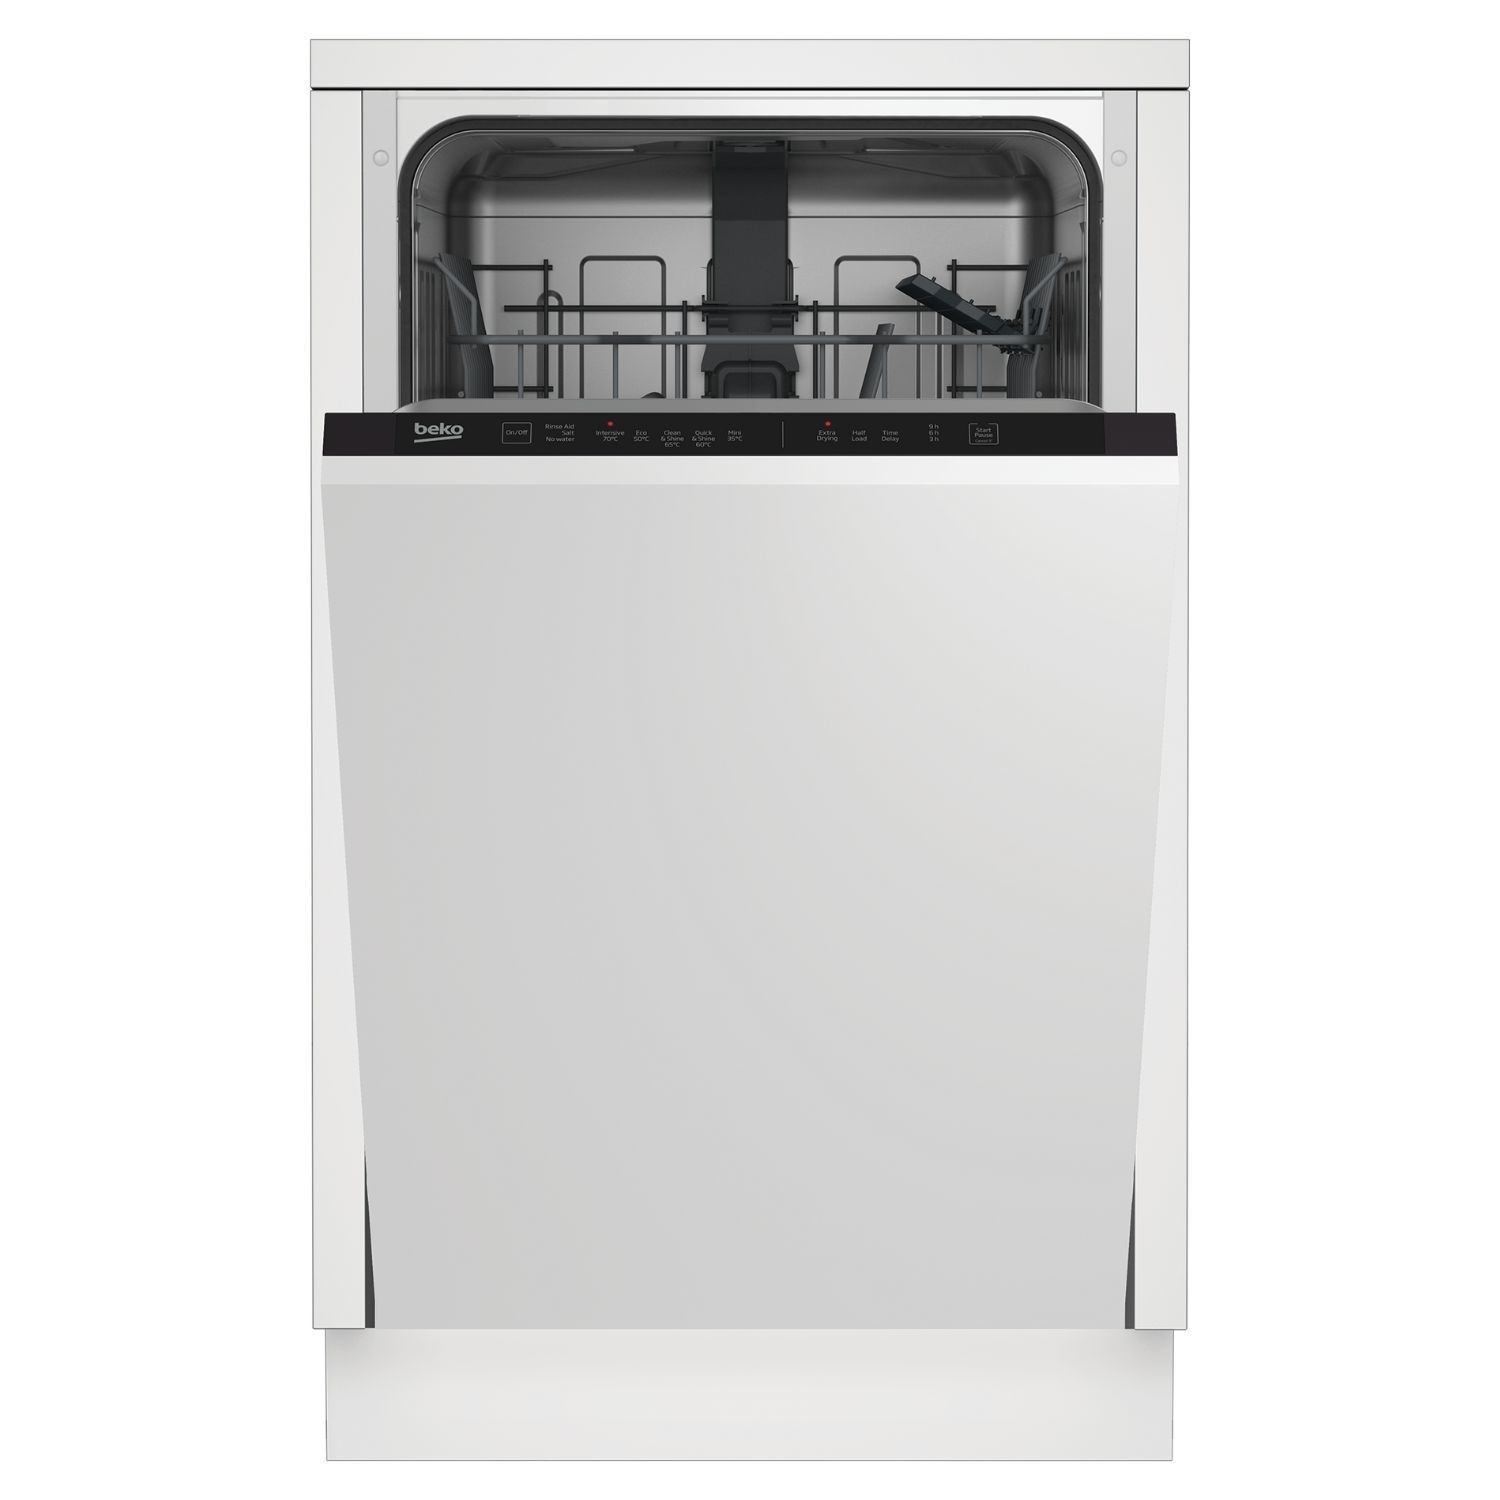 Beko DIS15020 Fully Integrated Slimline Dishwasher - Black Control Panel with Fixed Door Fixing Kit - E Rated